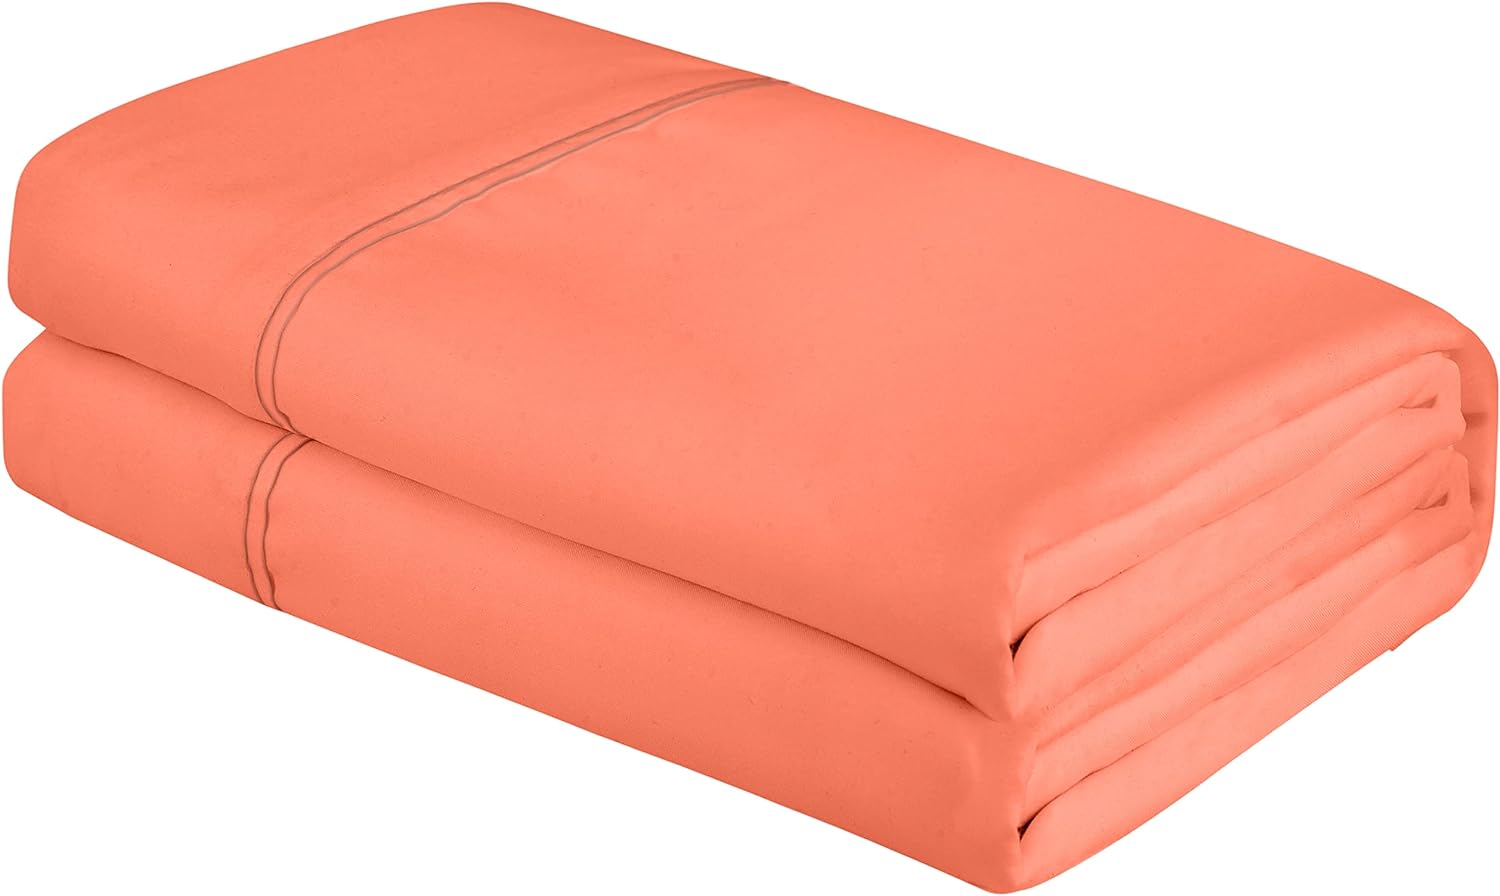 Royale Linens Queen Size Flat Sheet Only - Brushed 1800 Microfiber - Ultra Soft & Breathable - Wrinkle & Stain Resistant - Hotel Quality Flat Sheet Sold Separately - Top Sheet For Bed - (Queen, Coral)